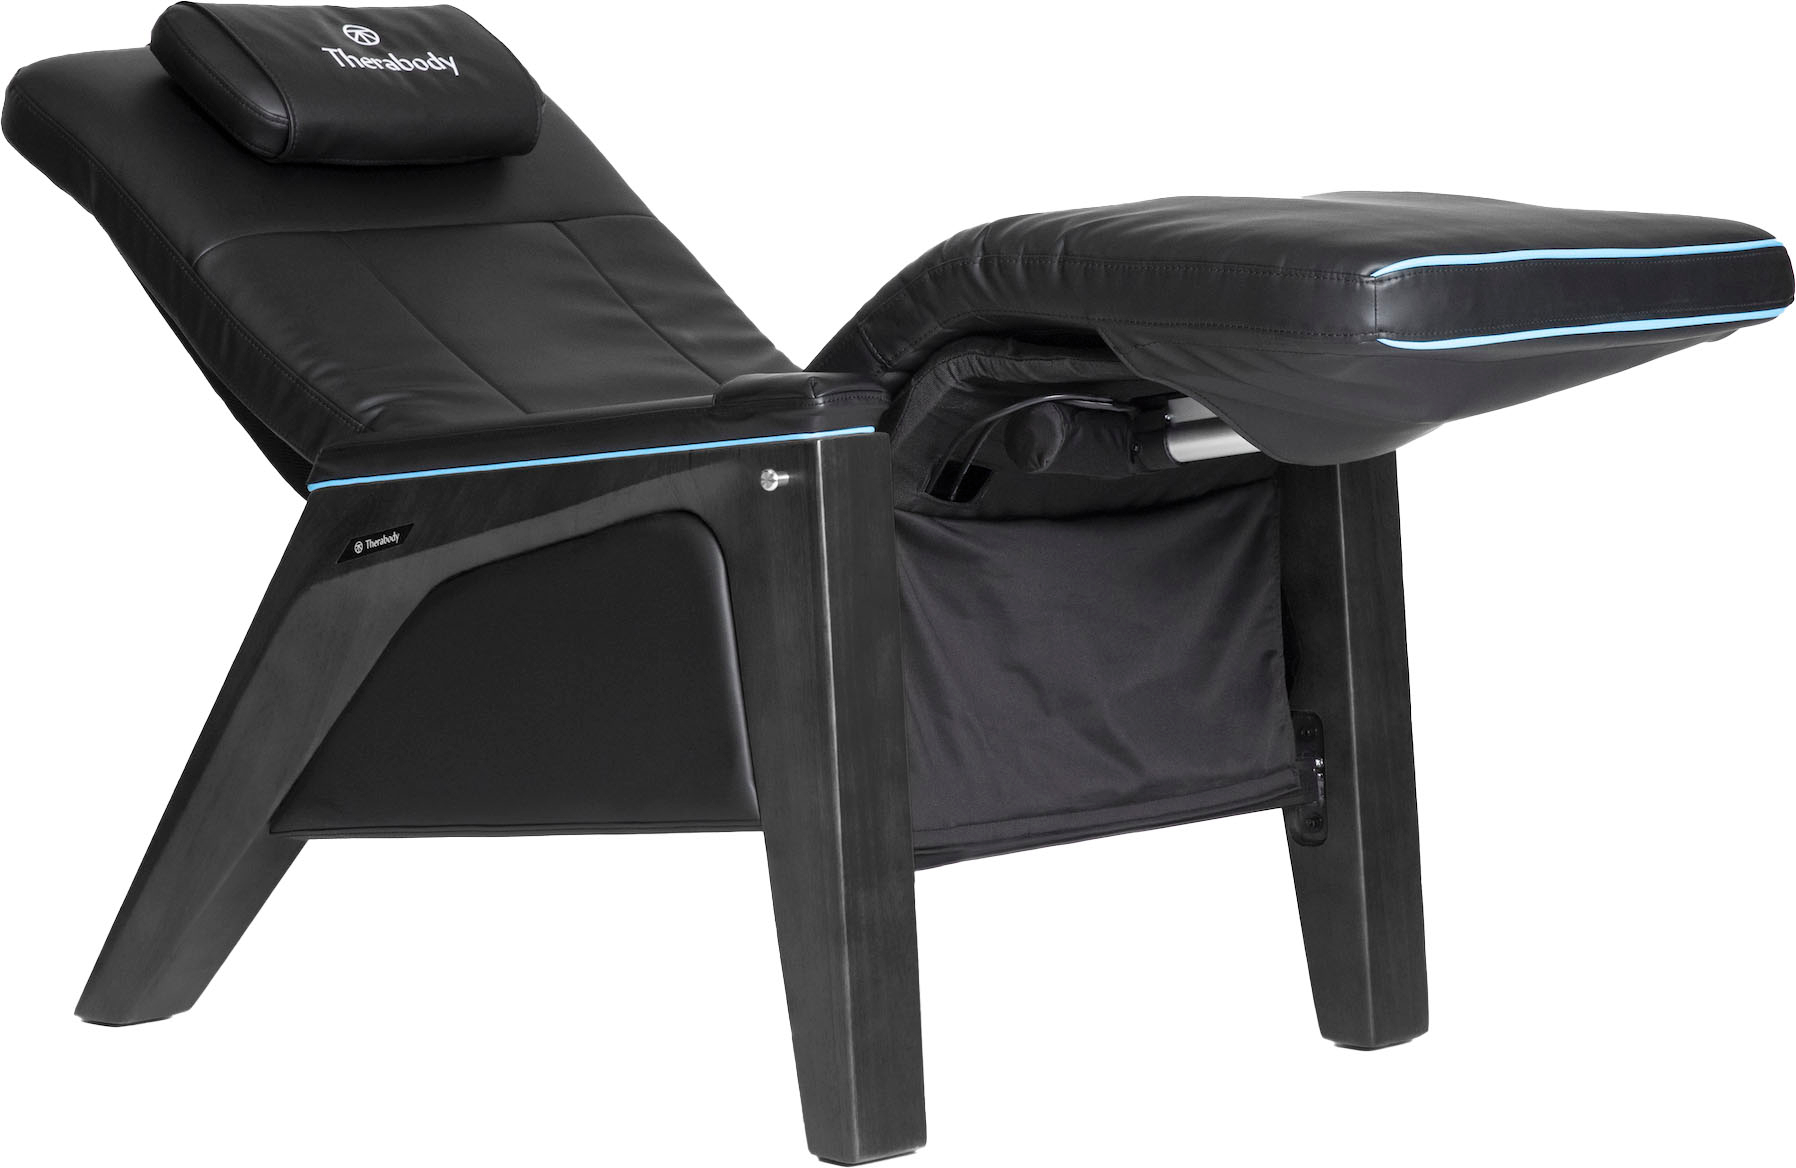 Therabody Therasound Lounger Black TB03407-01 - Best Buy